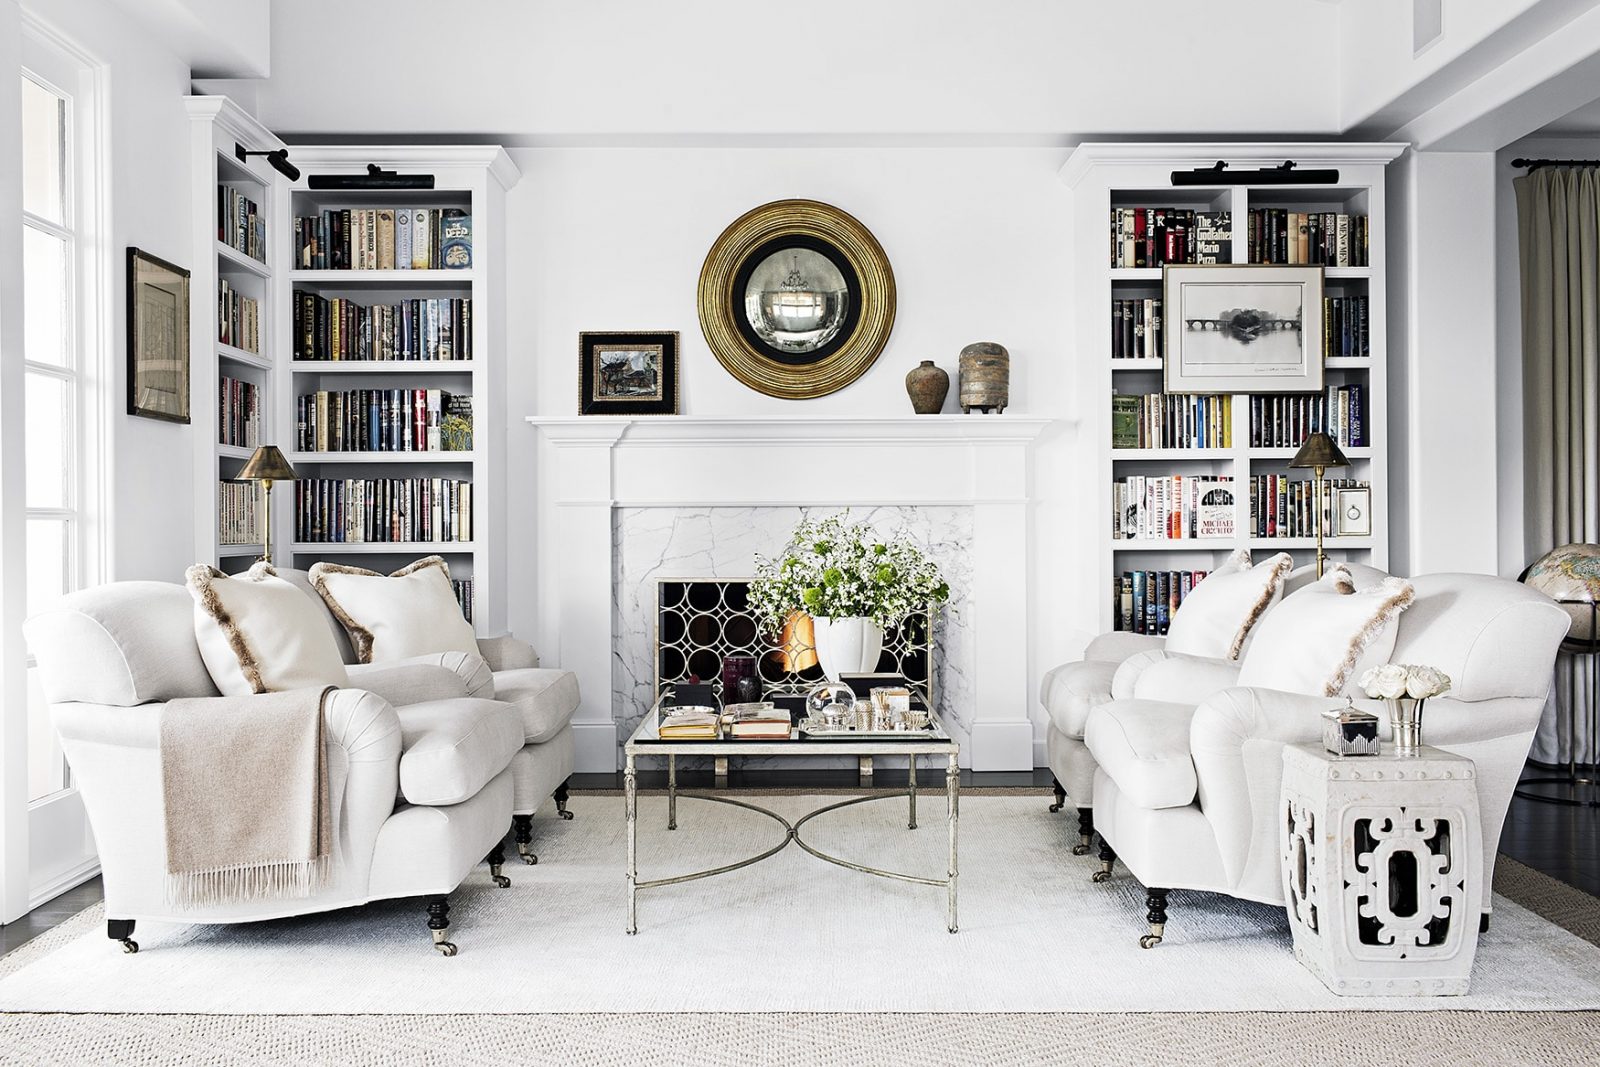 17 Fabulous Ideas Of Fireplace With, Bookcases Either Side Of Fireplace